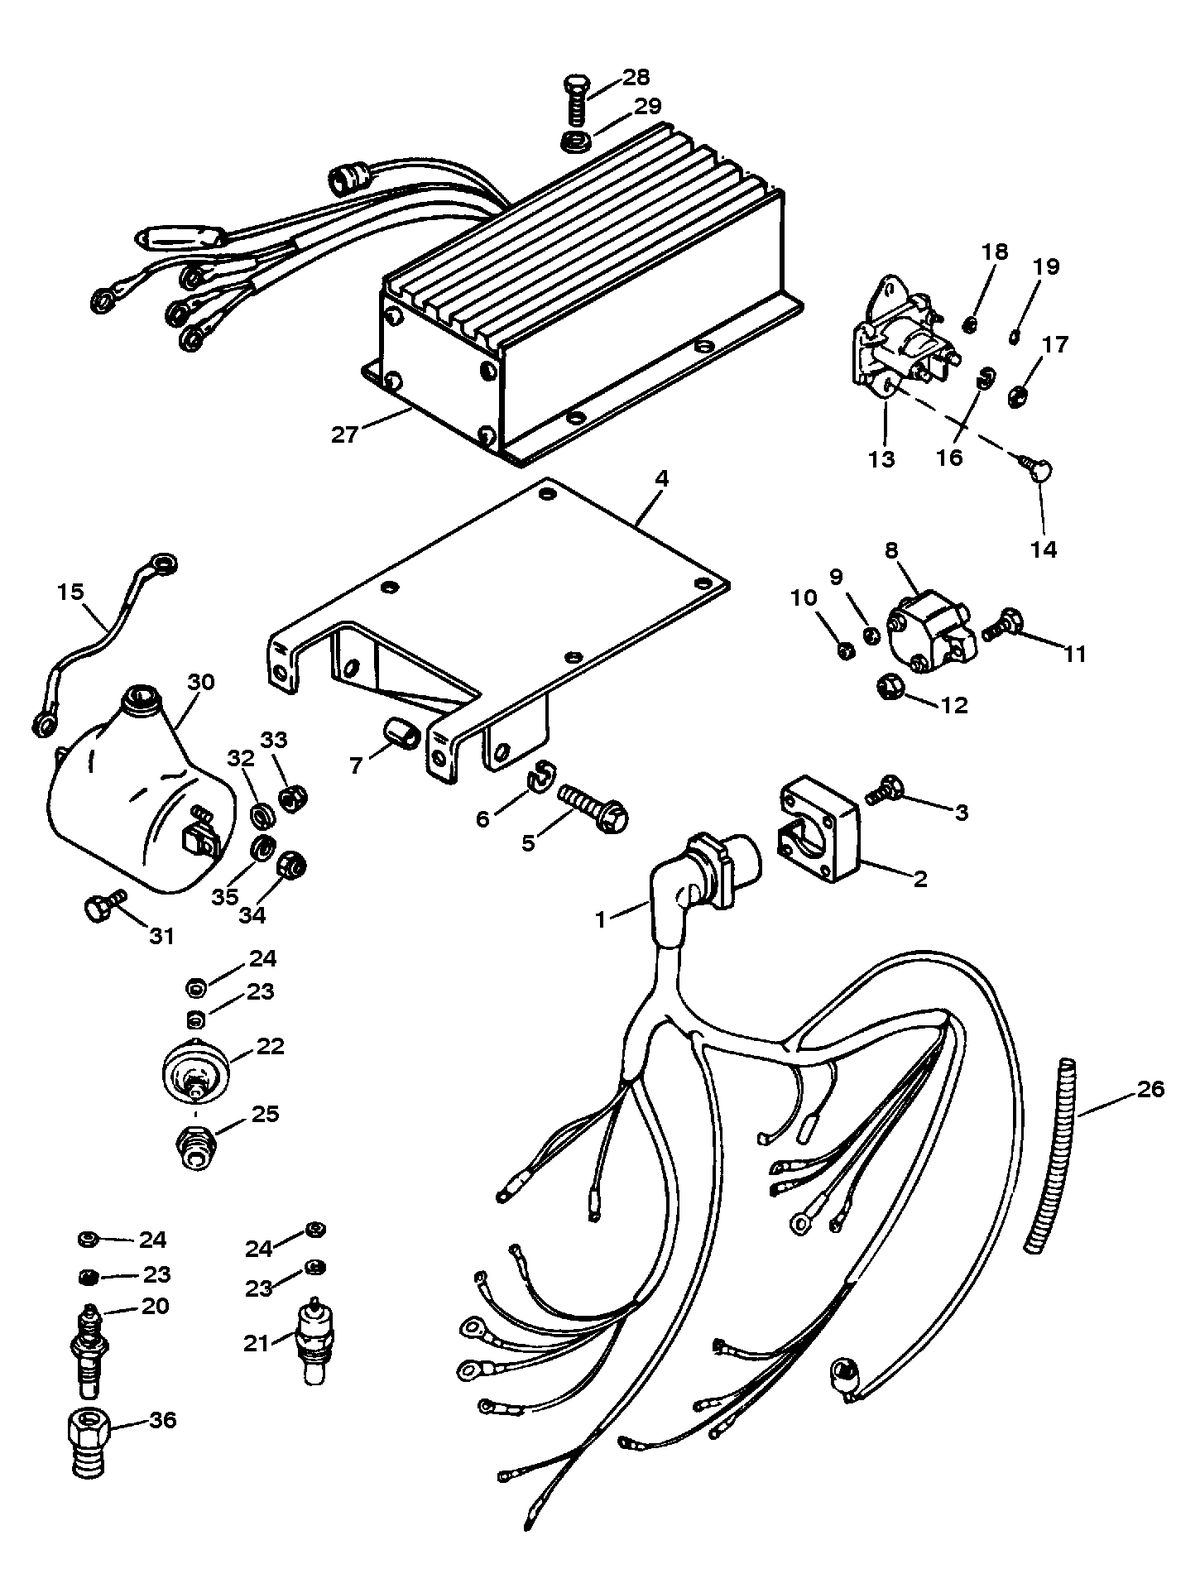 MERCRUISER 525 H.P. ENGINE WIRING & ELECTRICAL COMPONENTS (S/N: 0D456000 -  0D763831)